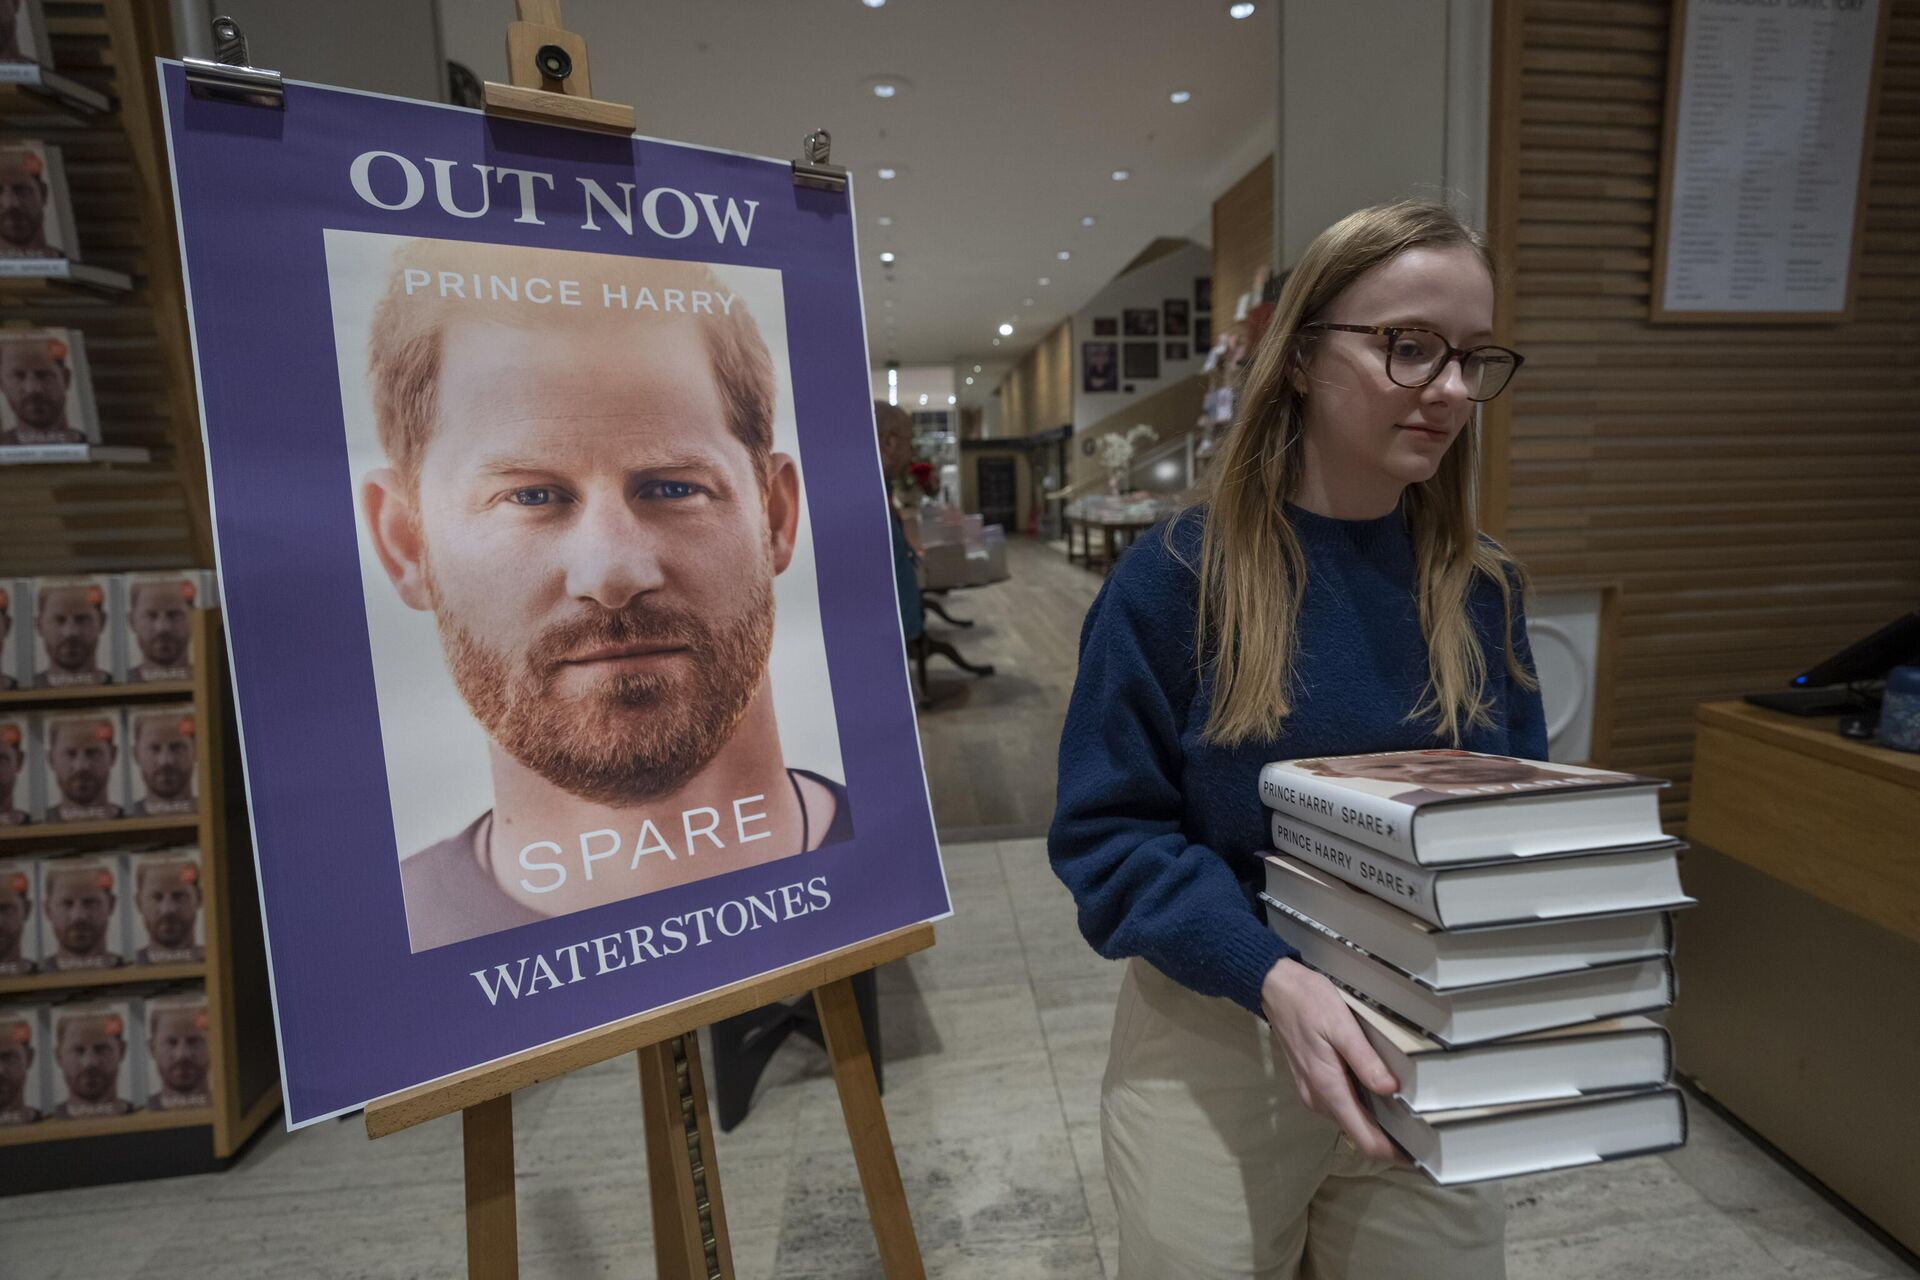 A member of staff places the copies of the new book by Prince Harry called Spare at a book store in London, Tuesday, Jan. 10, 2023. - Sputnik International, 1920, 14.01.2023